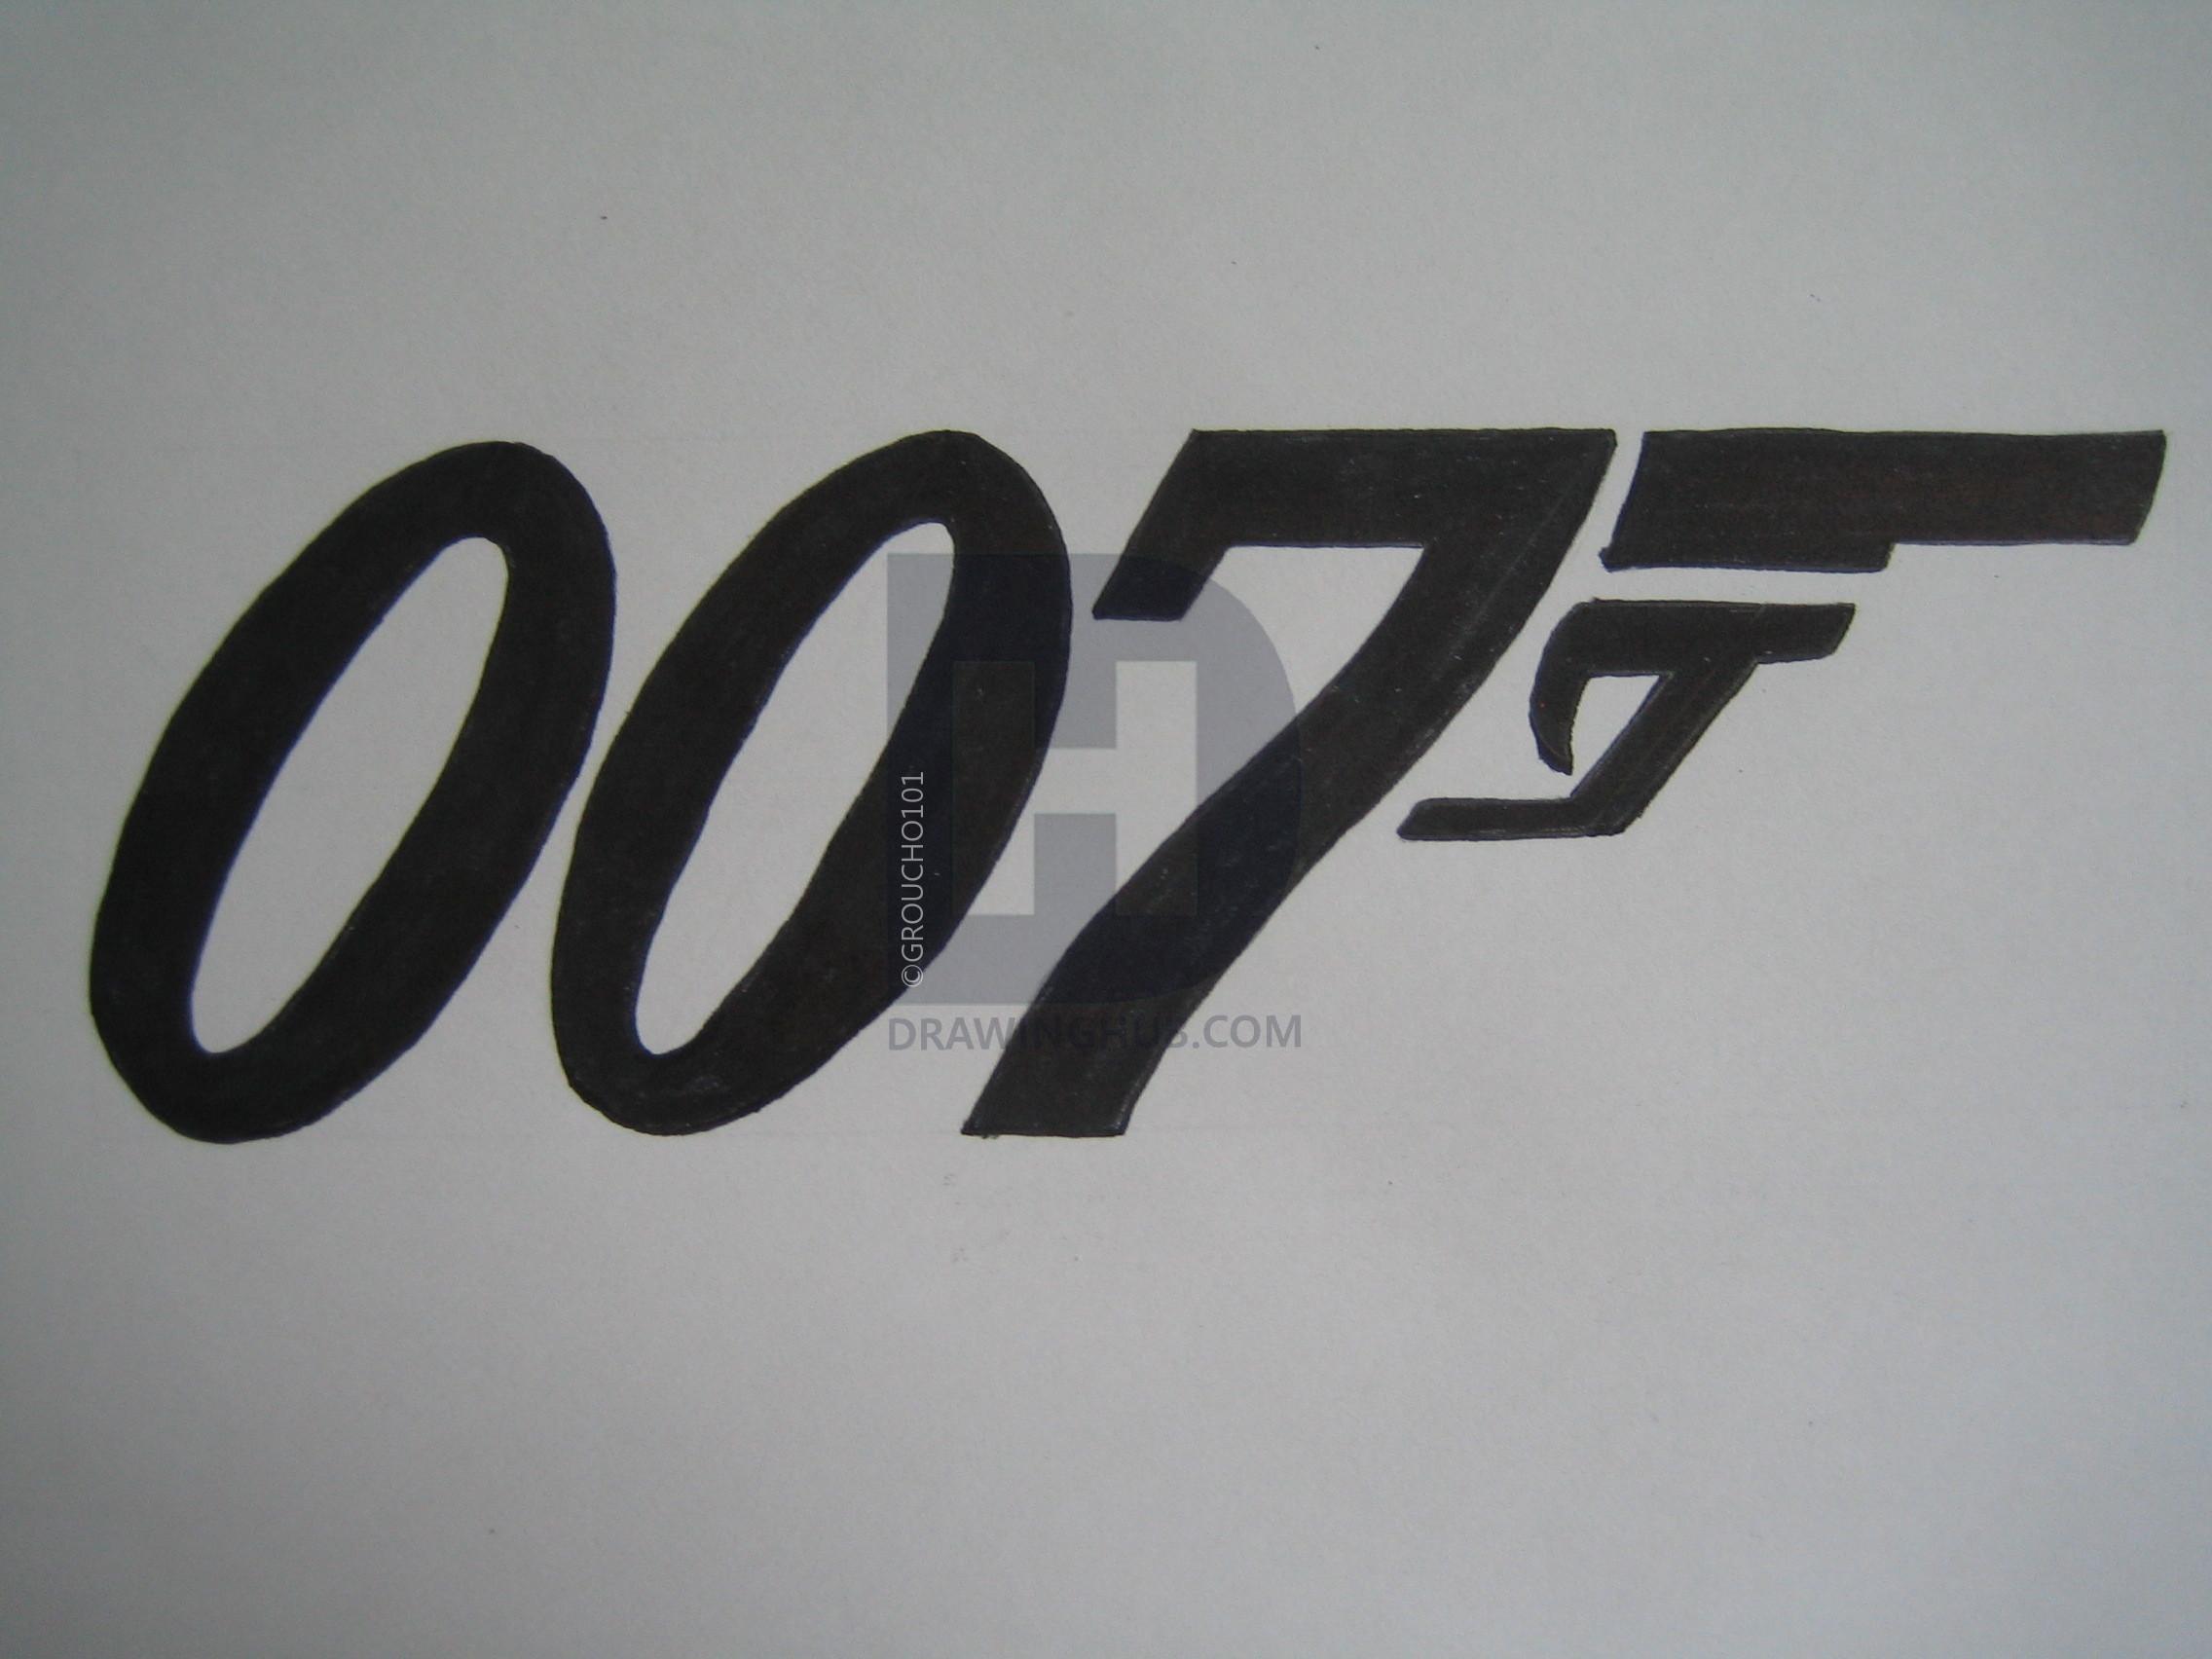 OO7 Logo - How To Draw The 007 Logo, Step by Step, Drawing Guide, by Groucho101 ...